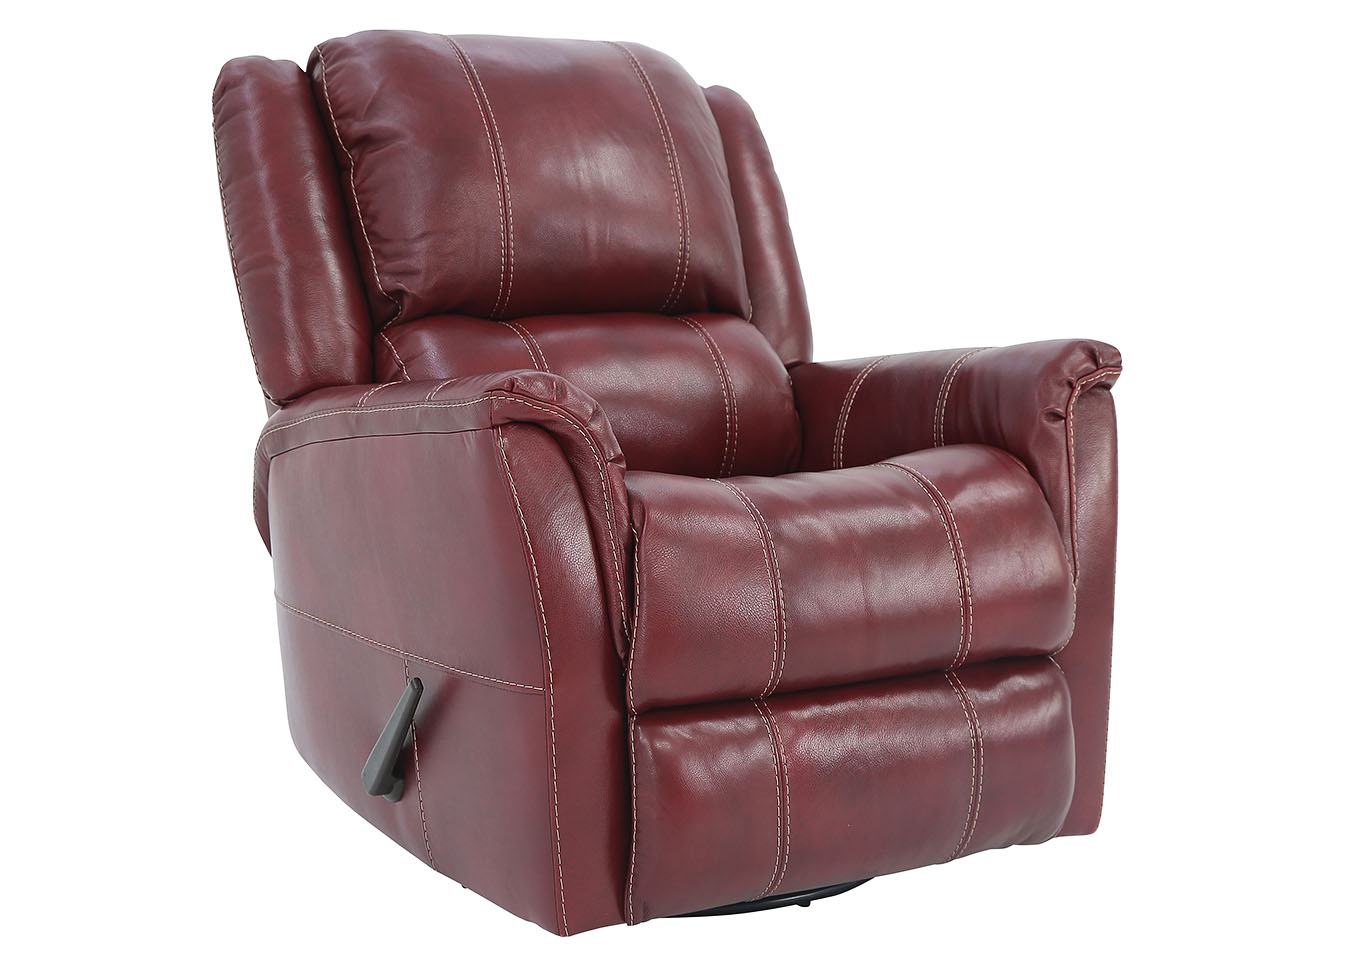 Bryce Red Leather Swivel Glider, Leather Recliner Glider Swivel Chair